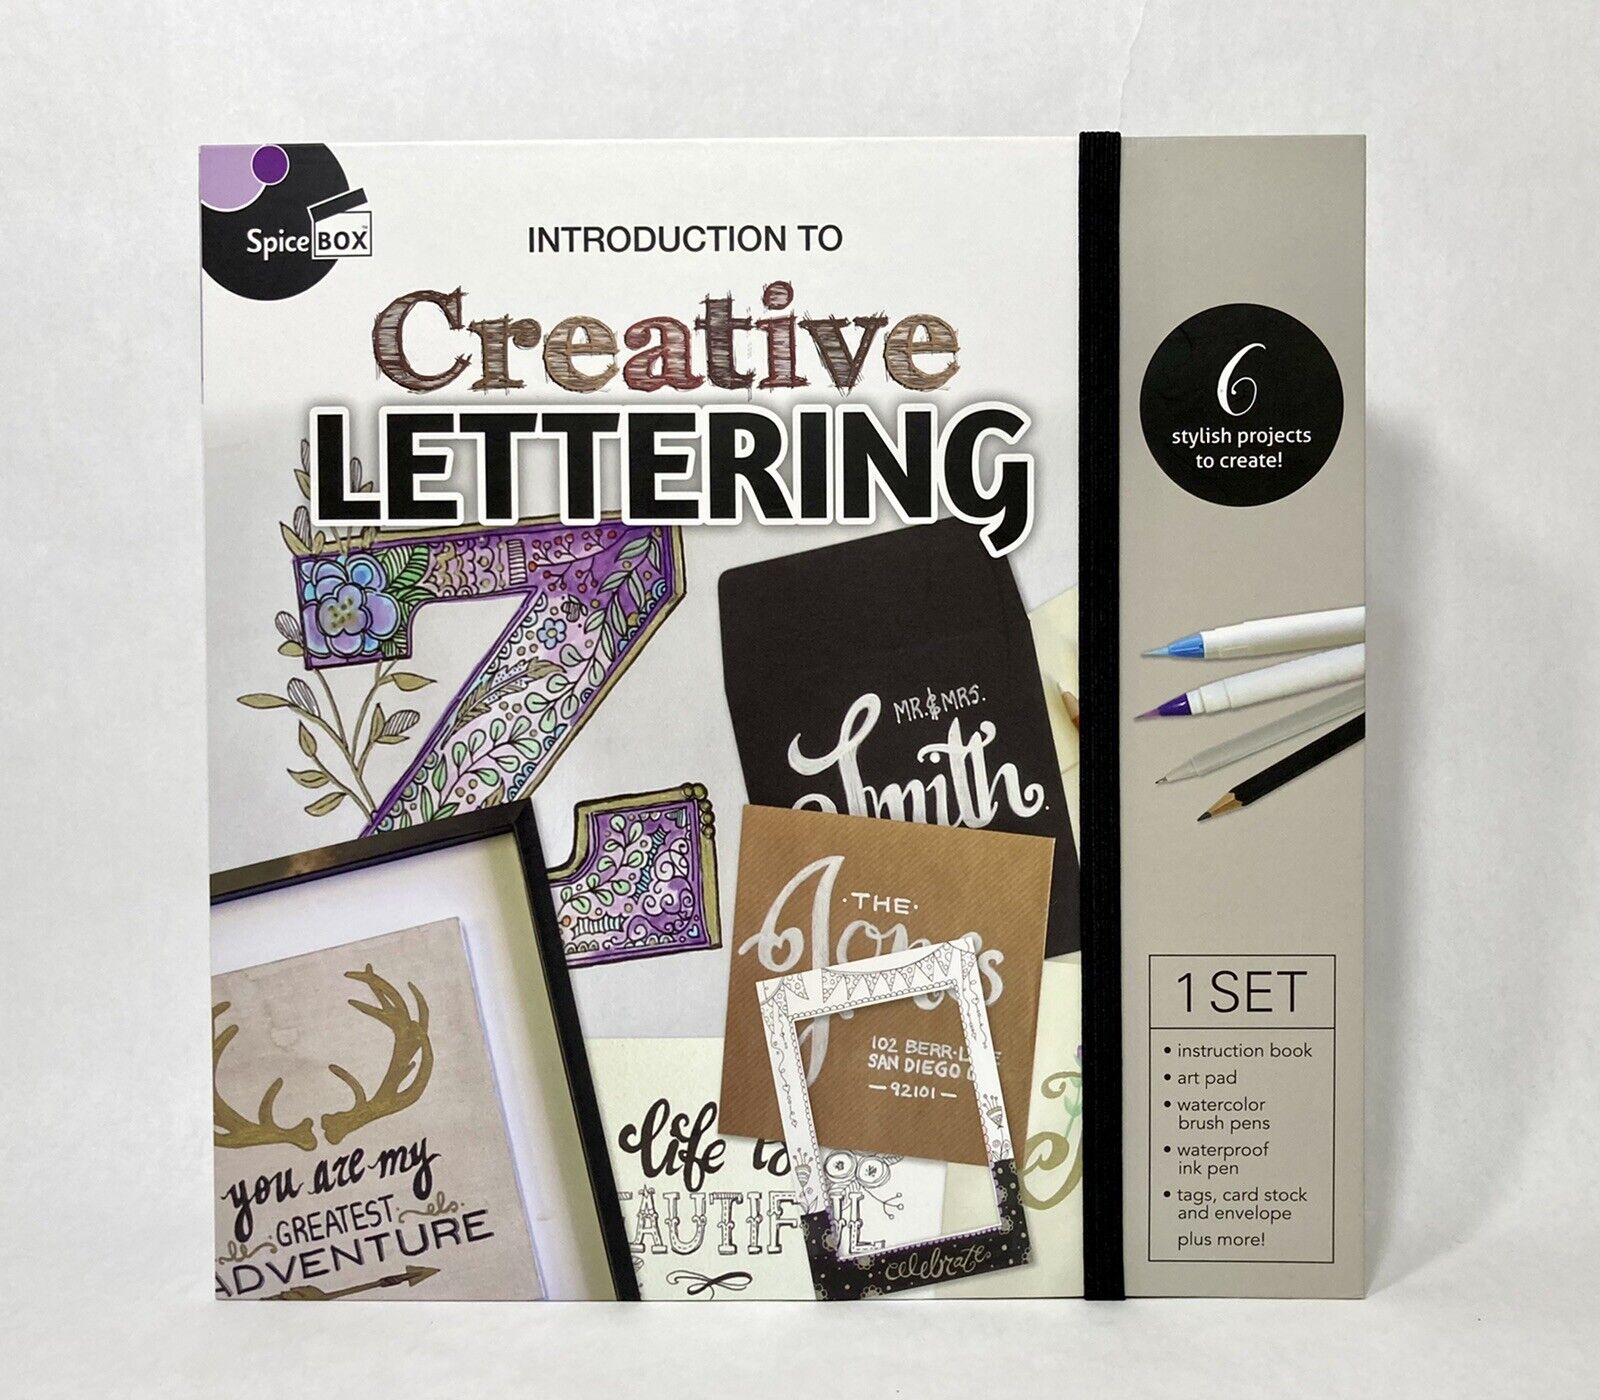 BRAND NEW Introduction To Creative Lettering Kit by Spice Box